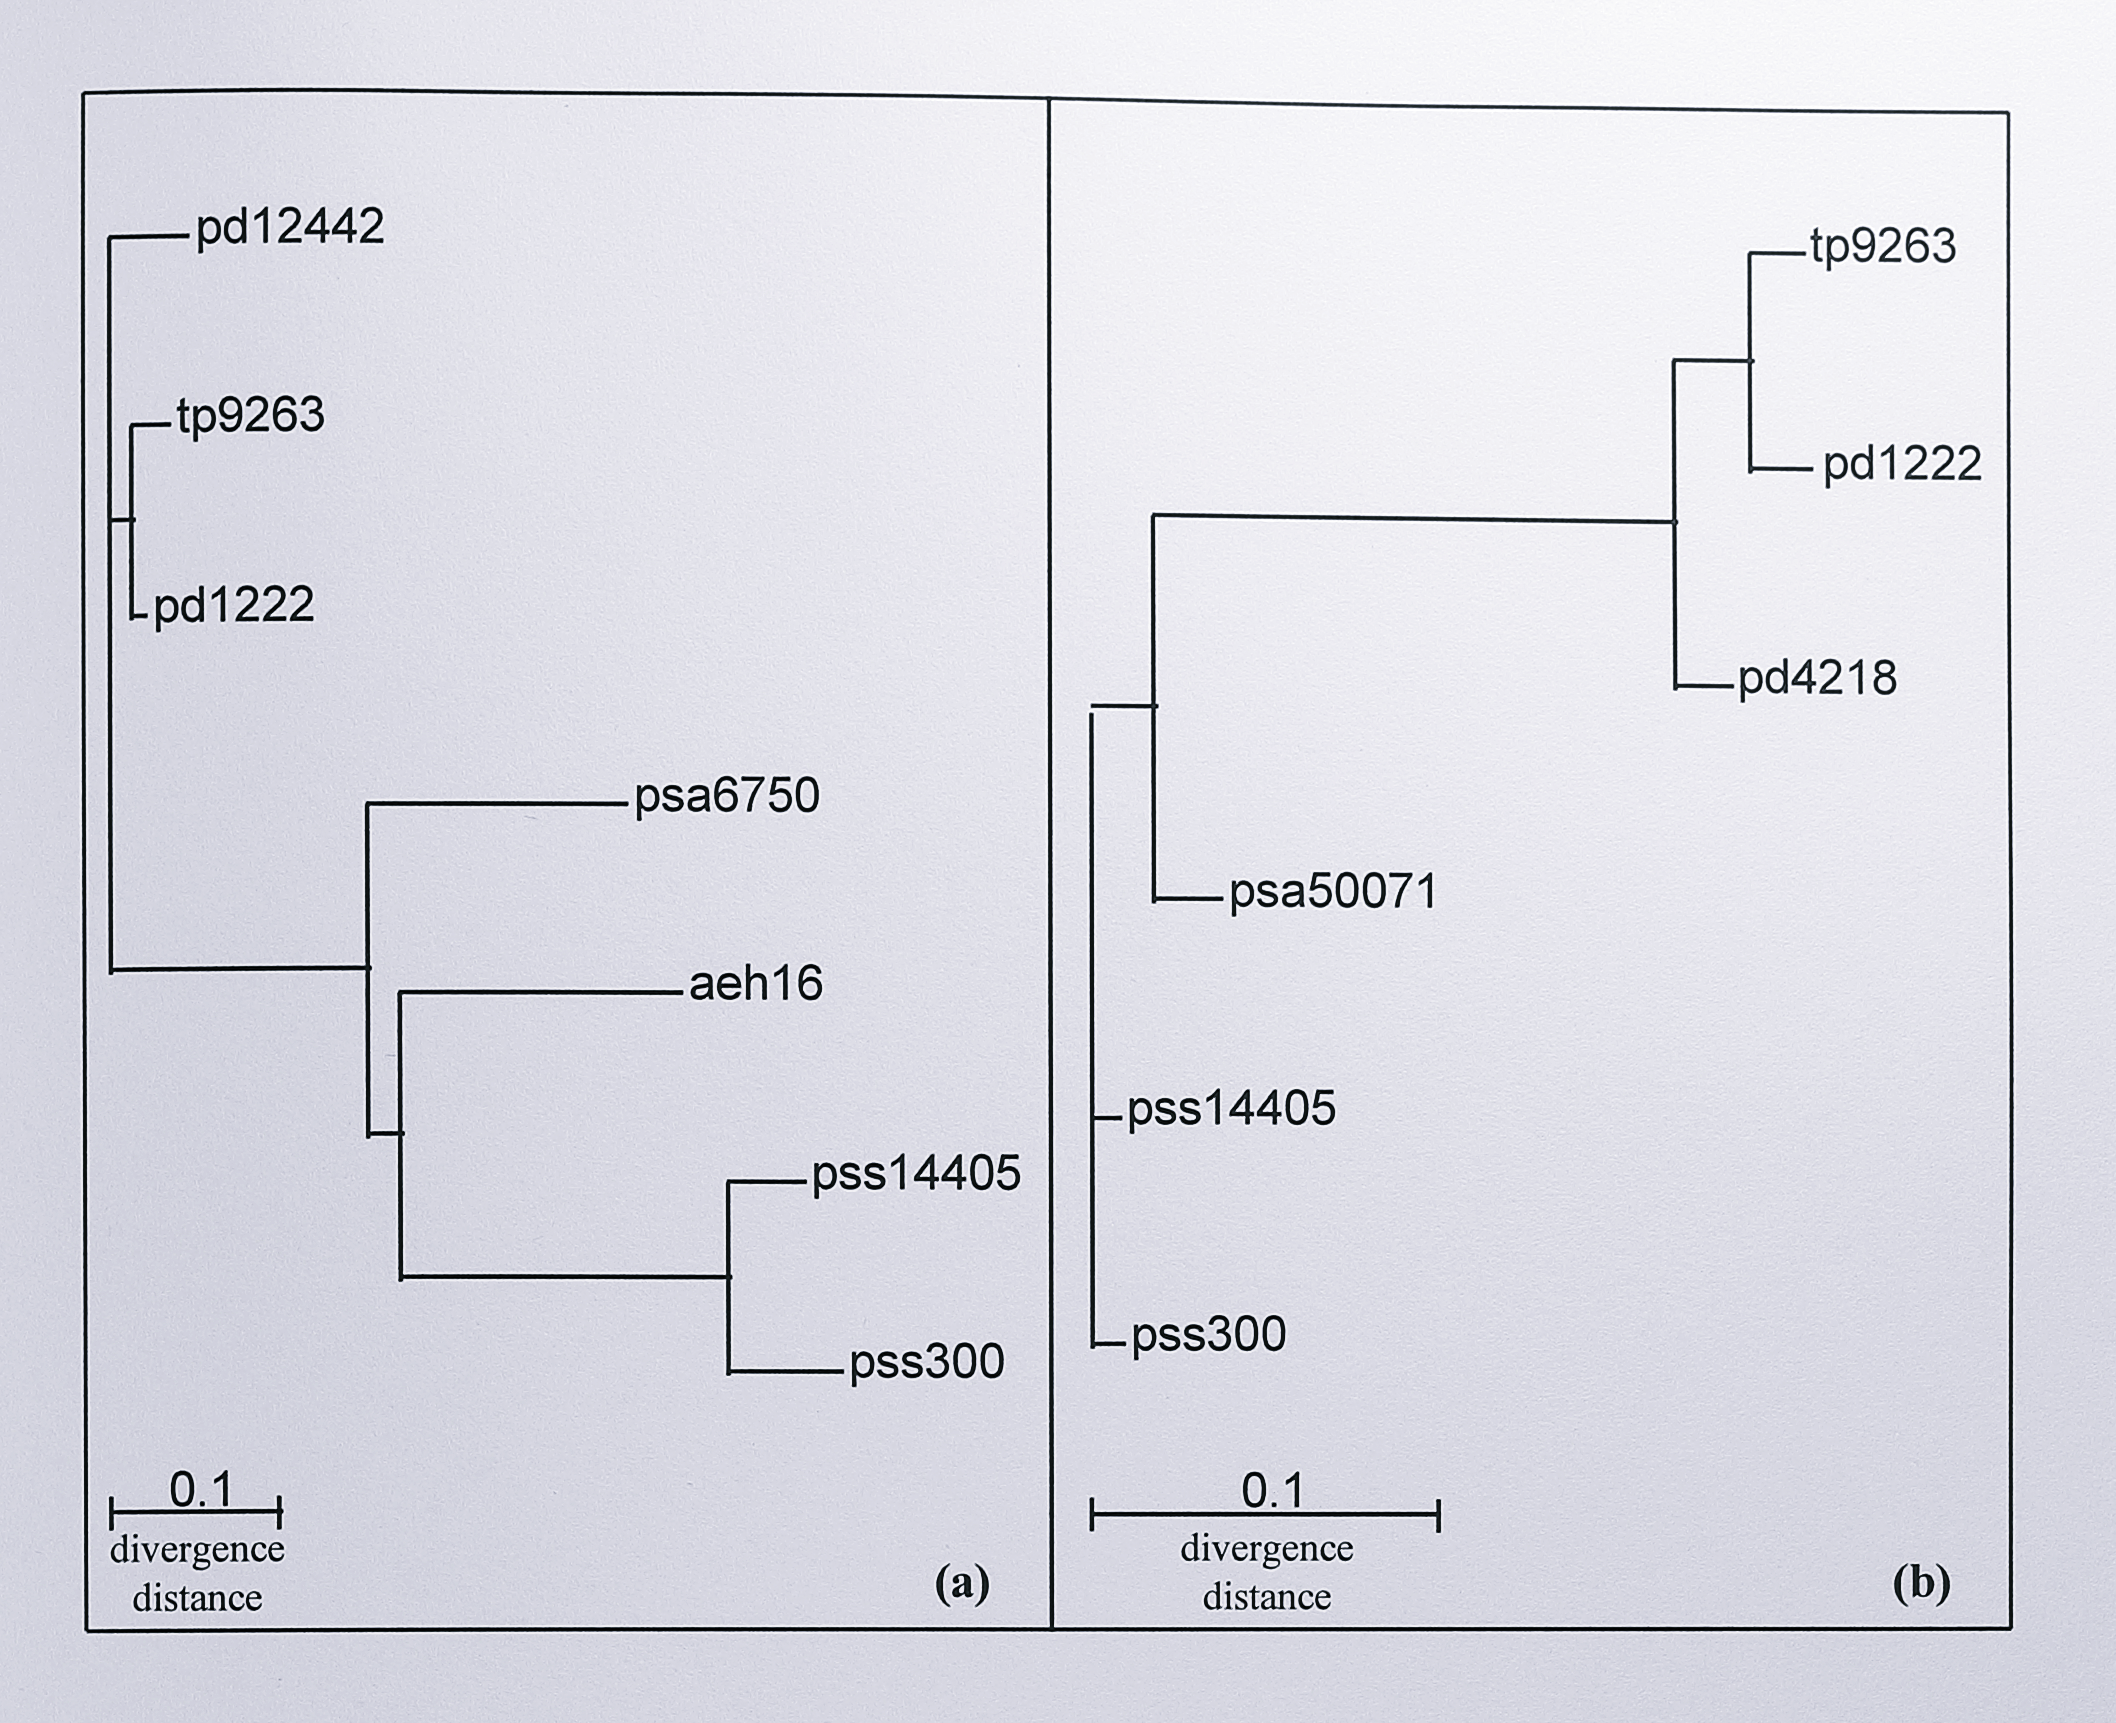 Phylogenetic tree of cytochrome _cd_$_1$ sequences compared with a phylogenetic tree of 16S rRNA sequences from the same organisms. (a) The sequences were aligned using the ClustalW program and the tree was calculated using the neighbour-joining method of Saitou and Nei [@saitou_neighbor-joining_1987]. The tree was then analysed using the method of bootstrapping, with 1000 trials and visualised with the program TreeView. Sequence abbreviations are as in Table 3.3. (b) The 16S rRNA tree was calculated in the same way as for the cytochromes _cd_$_1$, except that gaps were ignored due to the partial nature of the _T. pantotropha_ LMD 92.63 and _P. denitrificans_ PD1222 sequences (obtained from Dr. D.J. Richardson, University of East Anglia). Complete 16S rRNA gene sequences for _Ps. stutzeri_ ATCC 14405, _Ps. stutzeri_ JM300, _Ps. aeruginosa_ DSM 50071 (Psa50071) and _P. denitrificans_ LMG 4218 (Pd4218) were taken from the GenBank database.